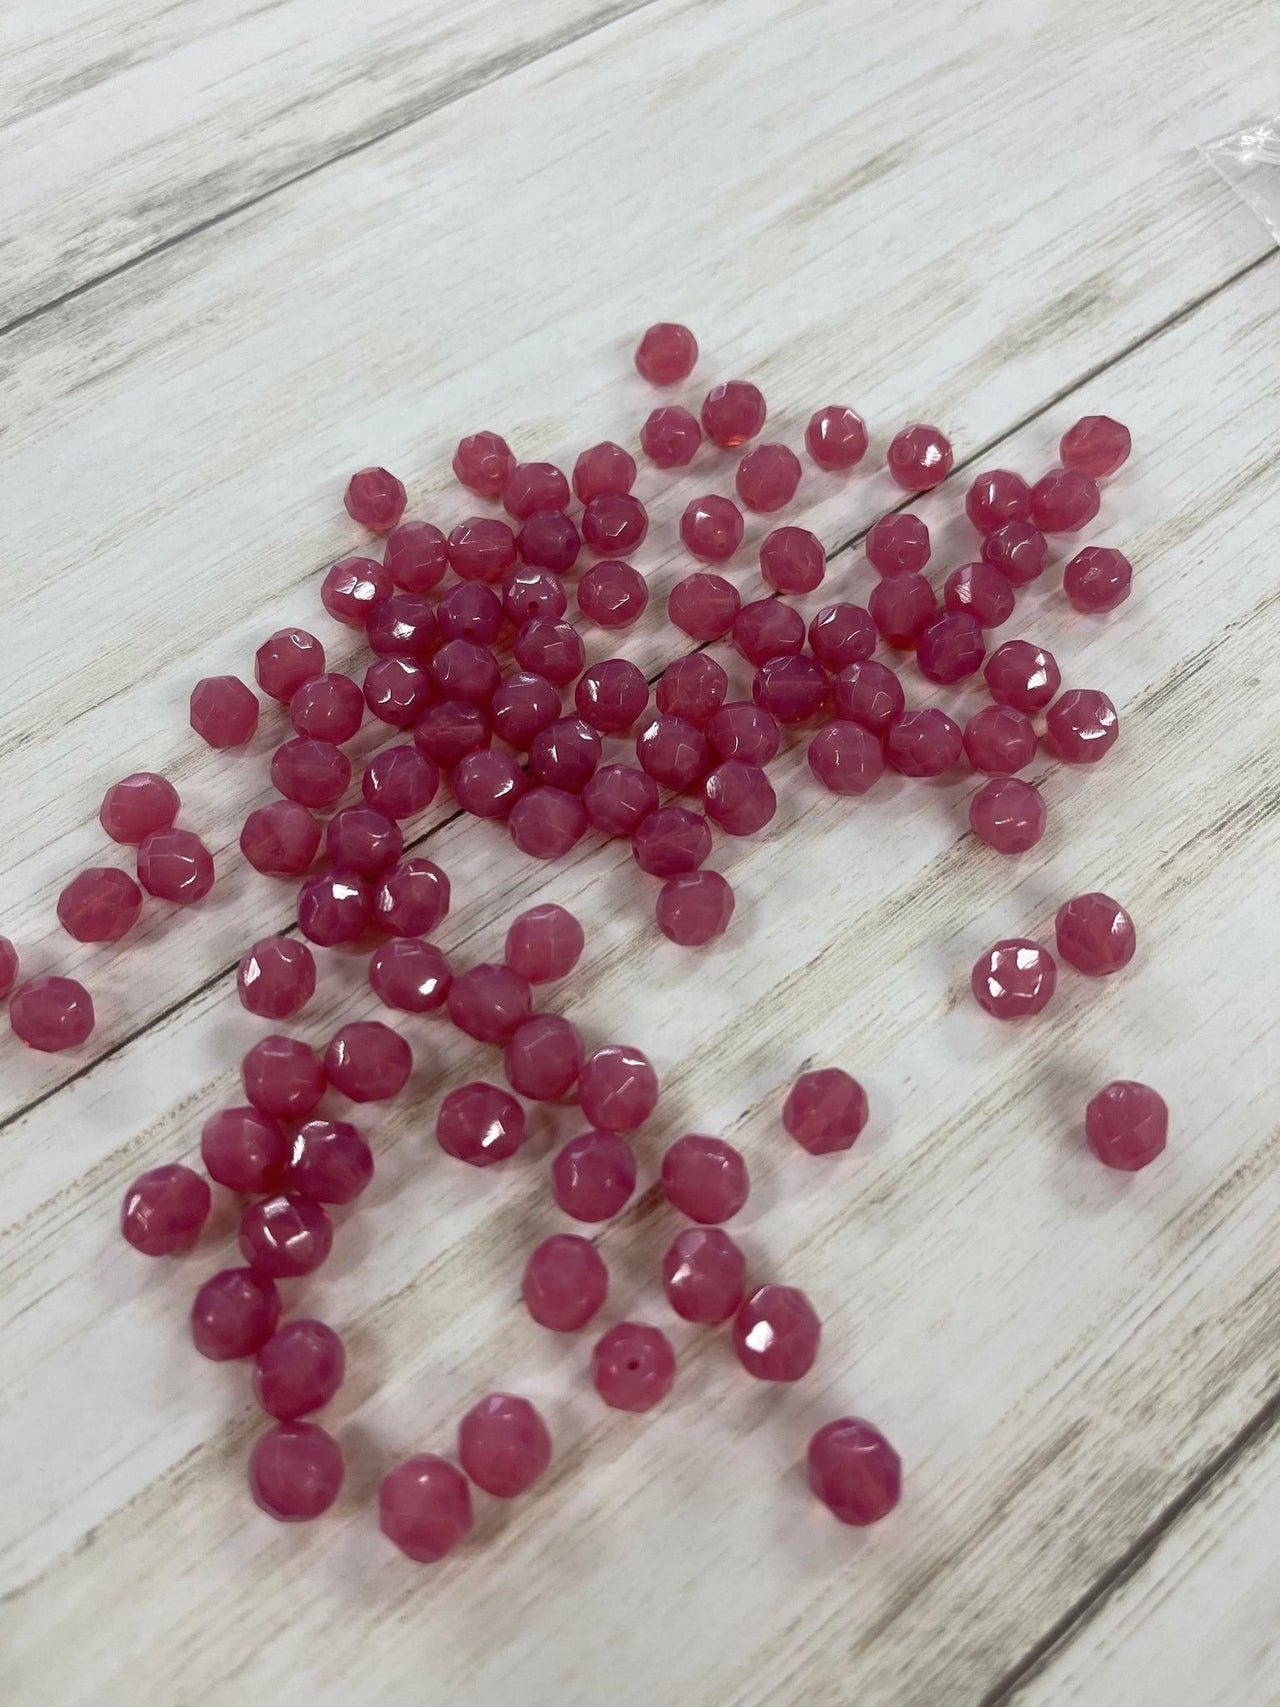 50 Czech Fire Polished 8mm Round Bead Crystal Pink 75014